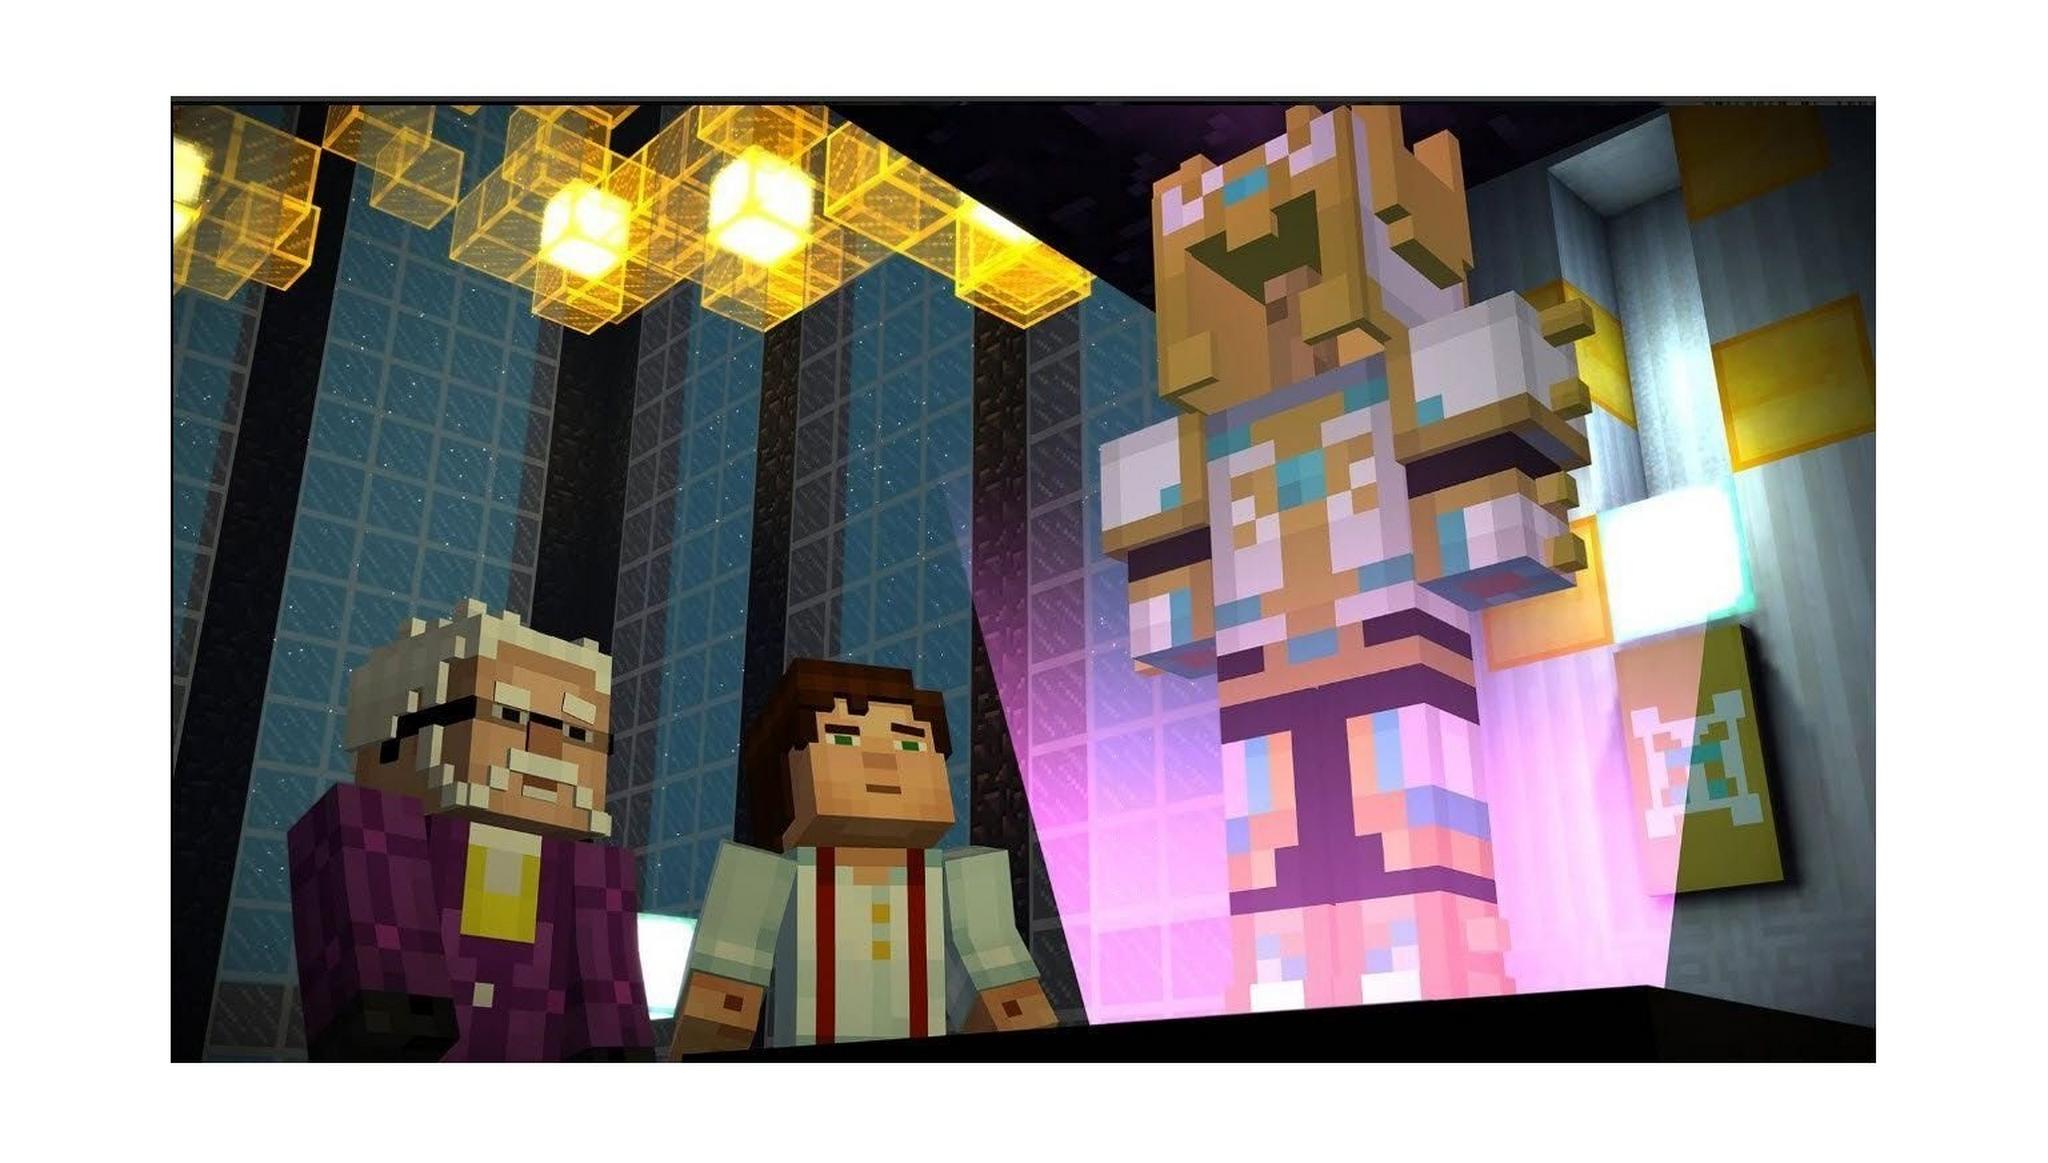 Minecraft Story Mode The Complete Adventure – Xbox 360 Game